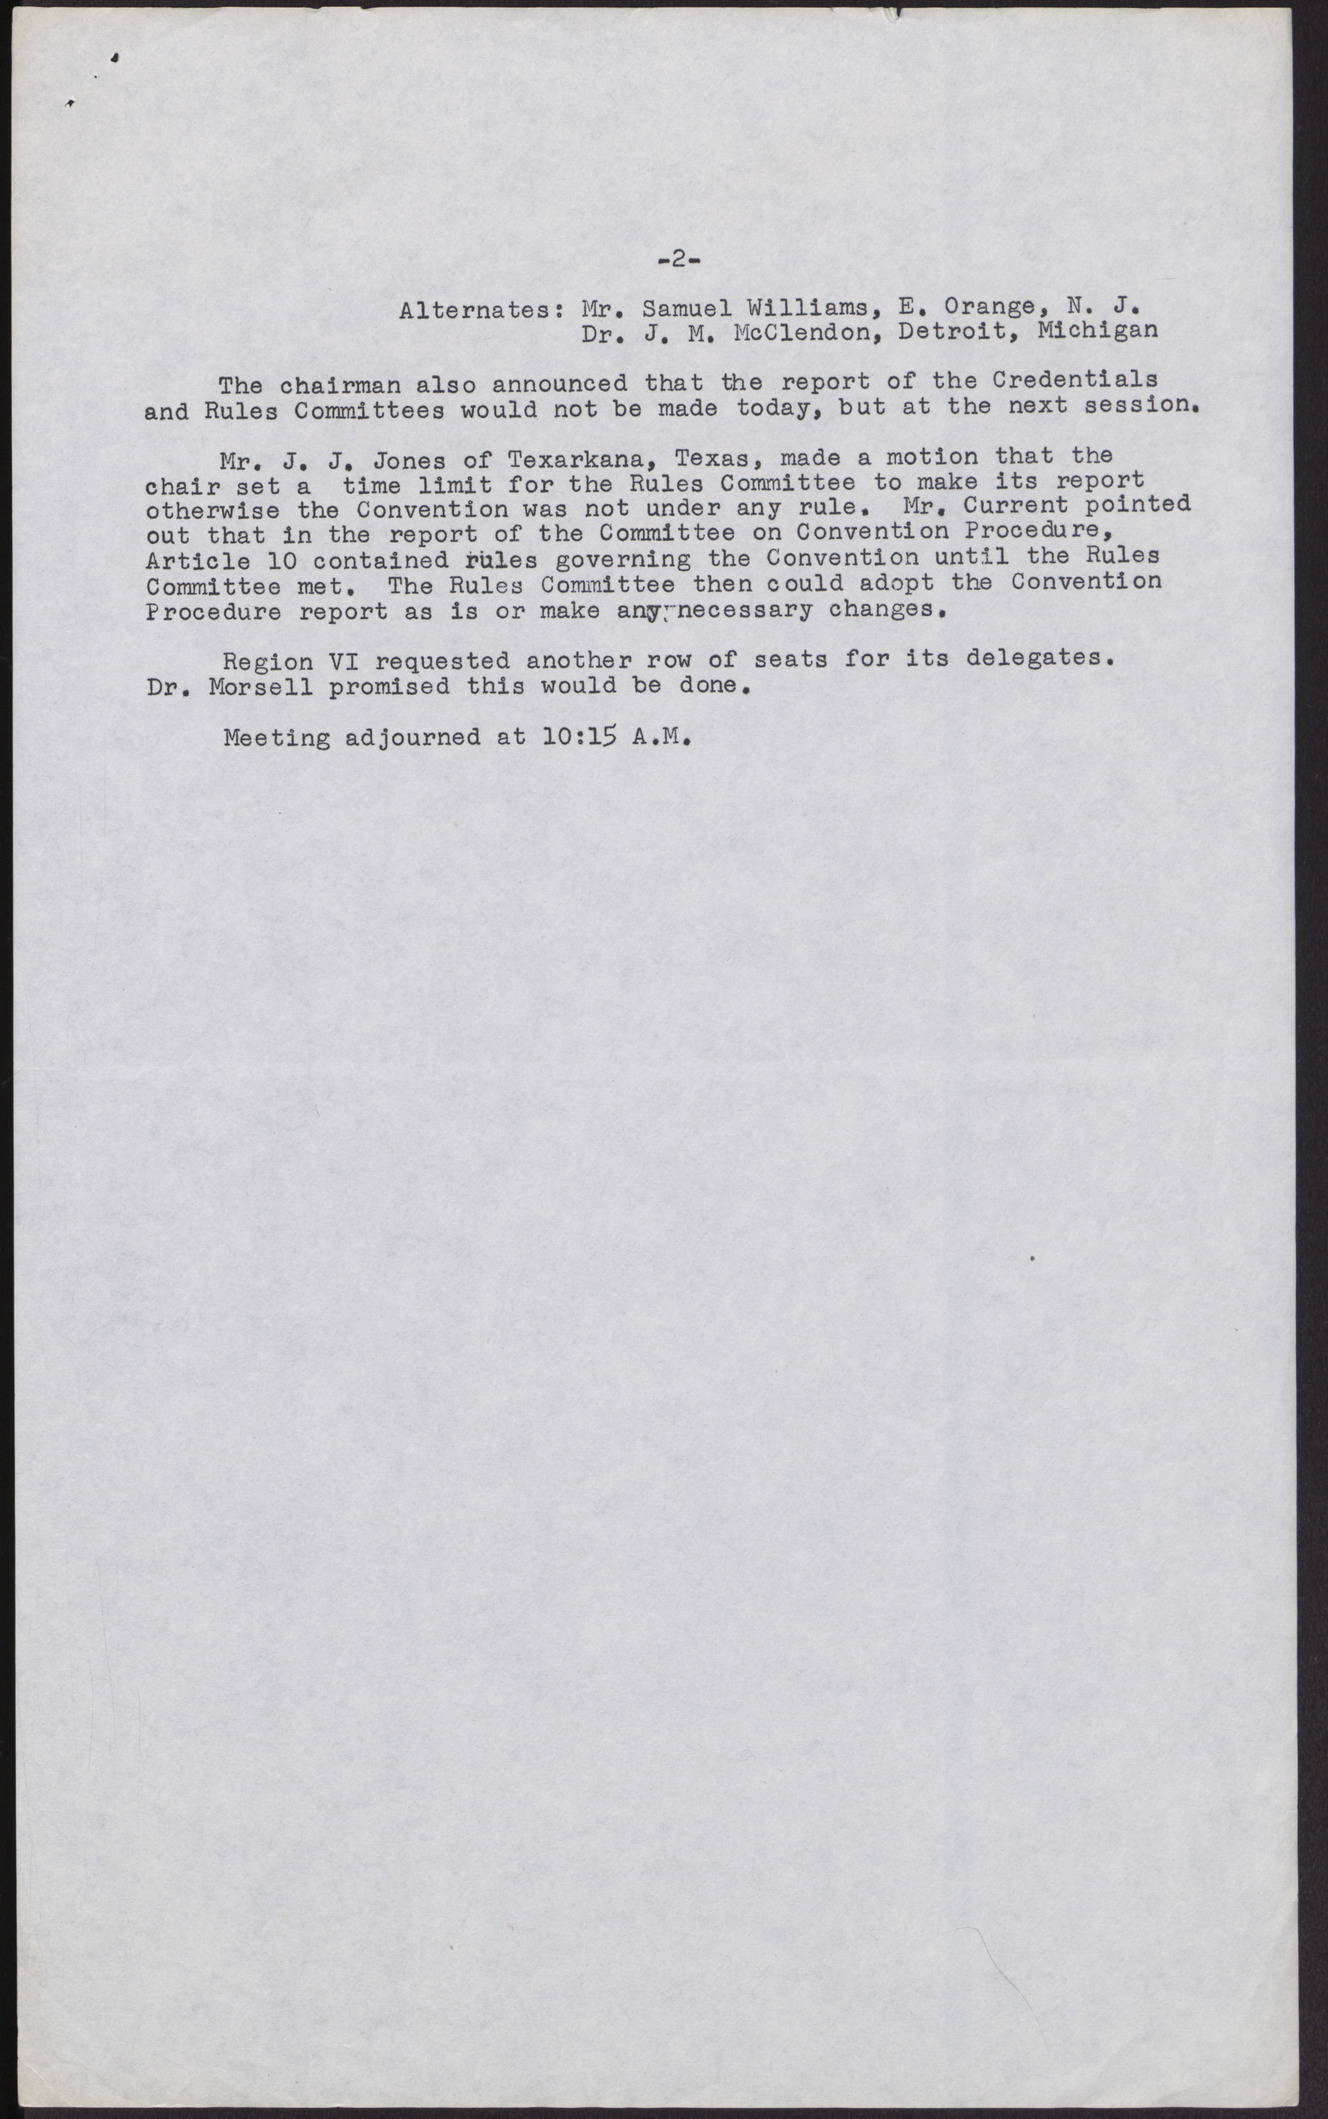 Minutes of the 51st Annual Convention (2 pages), June 22, 1960, page 2